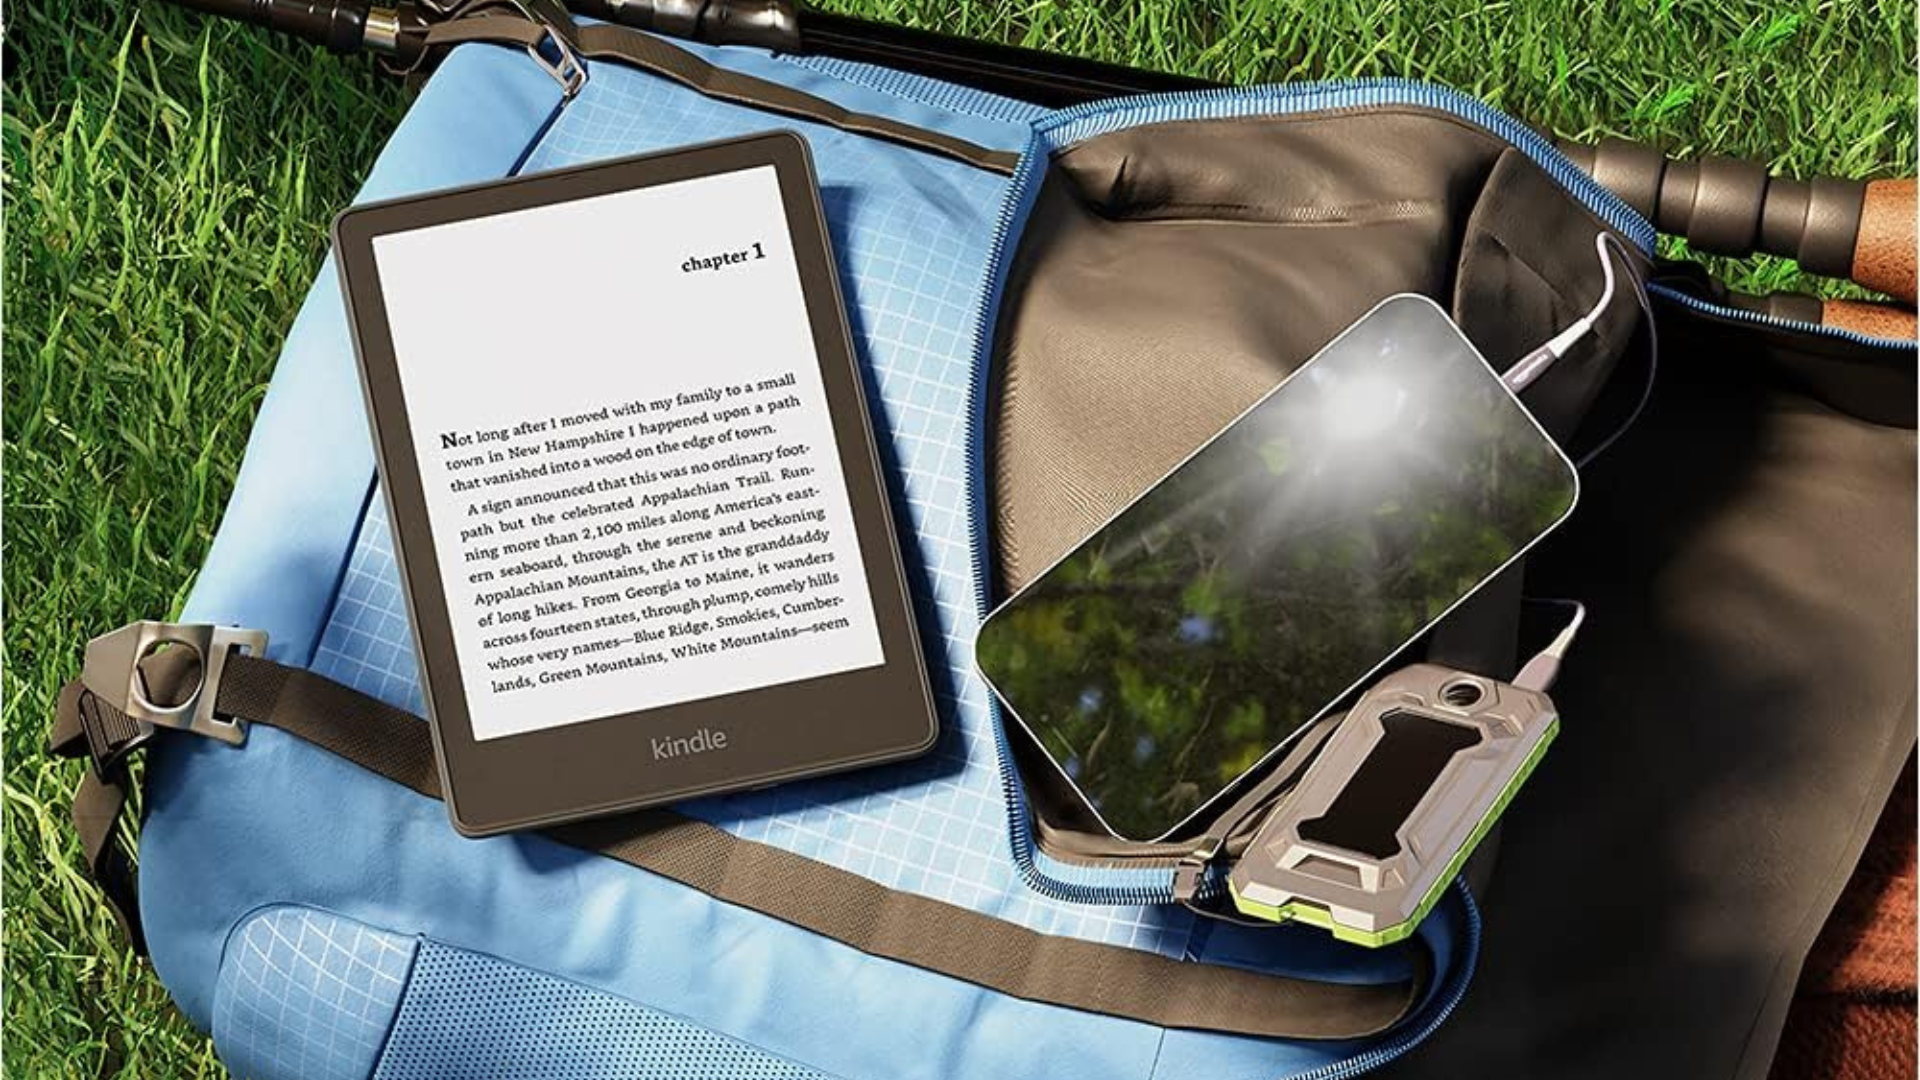 A Kindle Paperwhite sitting on a backback next to a smartphone